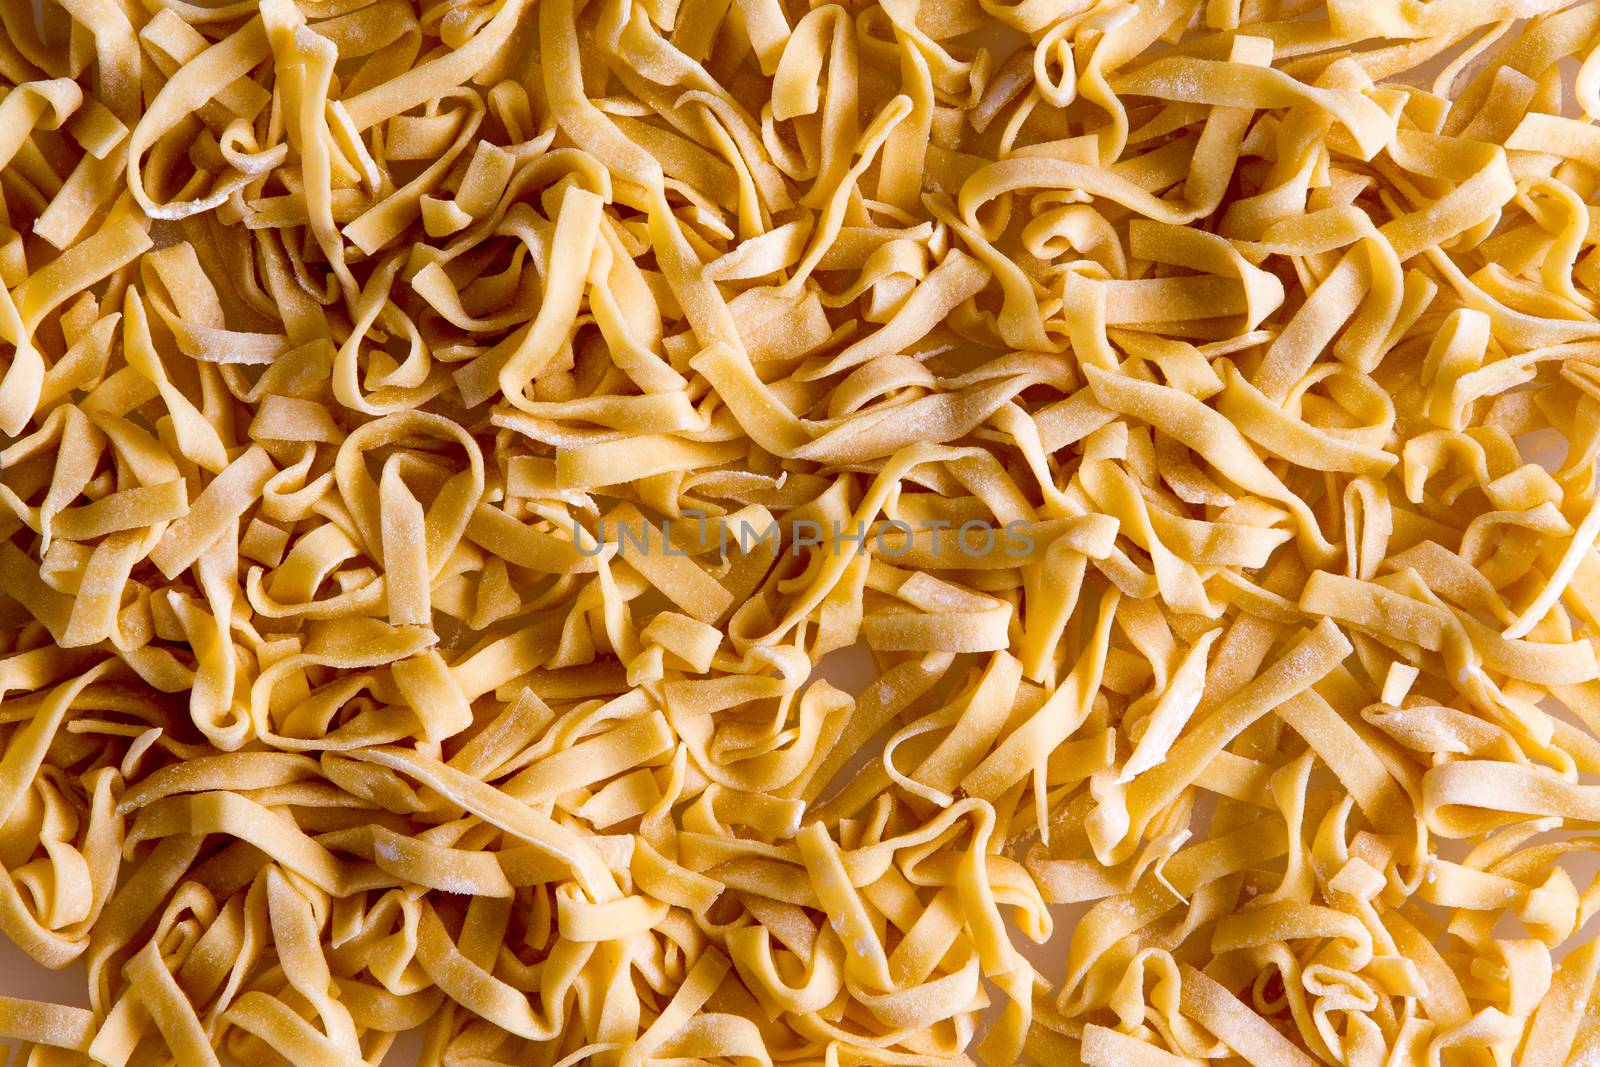 Background of freshly made fettuccine pasta by coskun